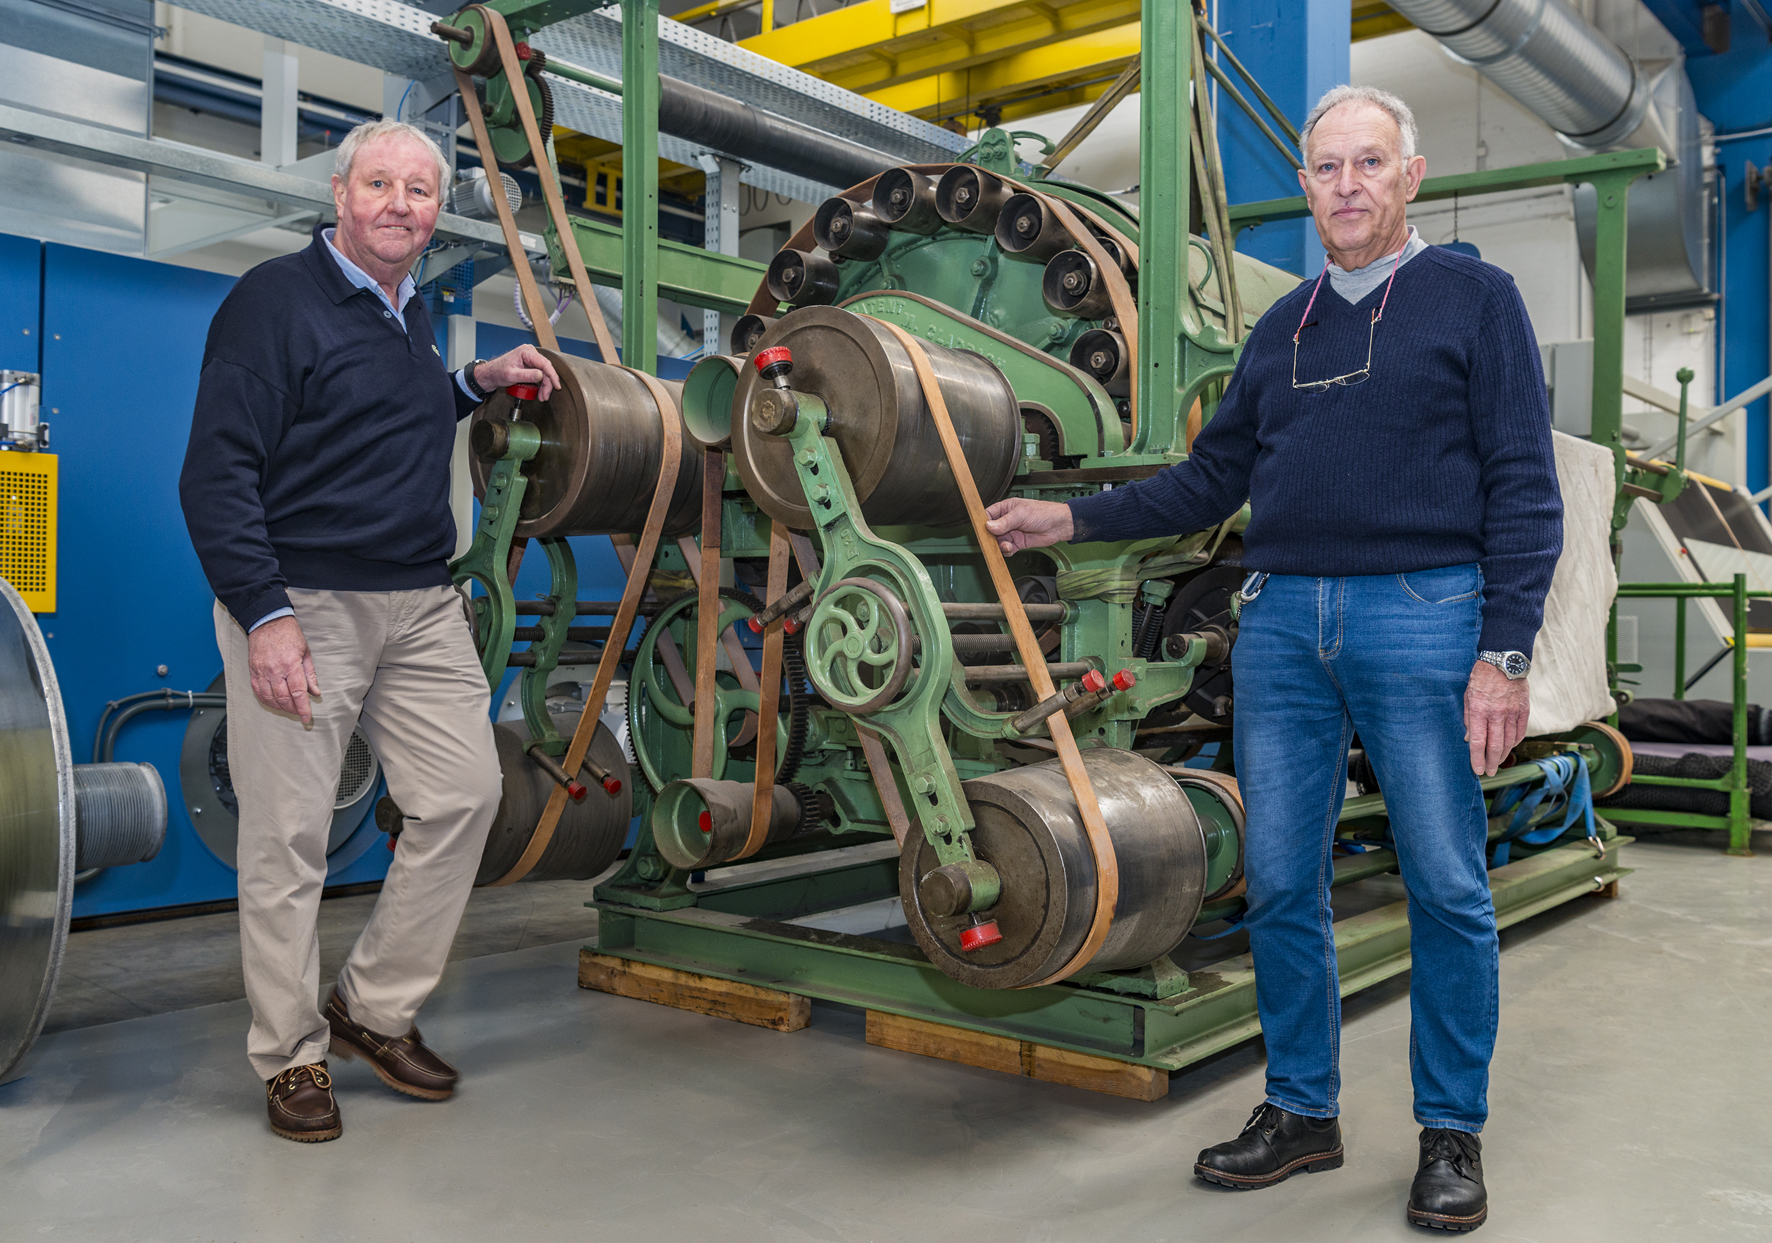 Fred Vohsdahl (left) and Walter Dresen with the103-year-old Monforts machine. © Monforts.